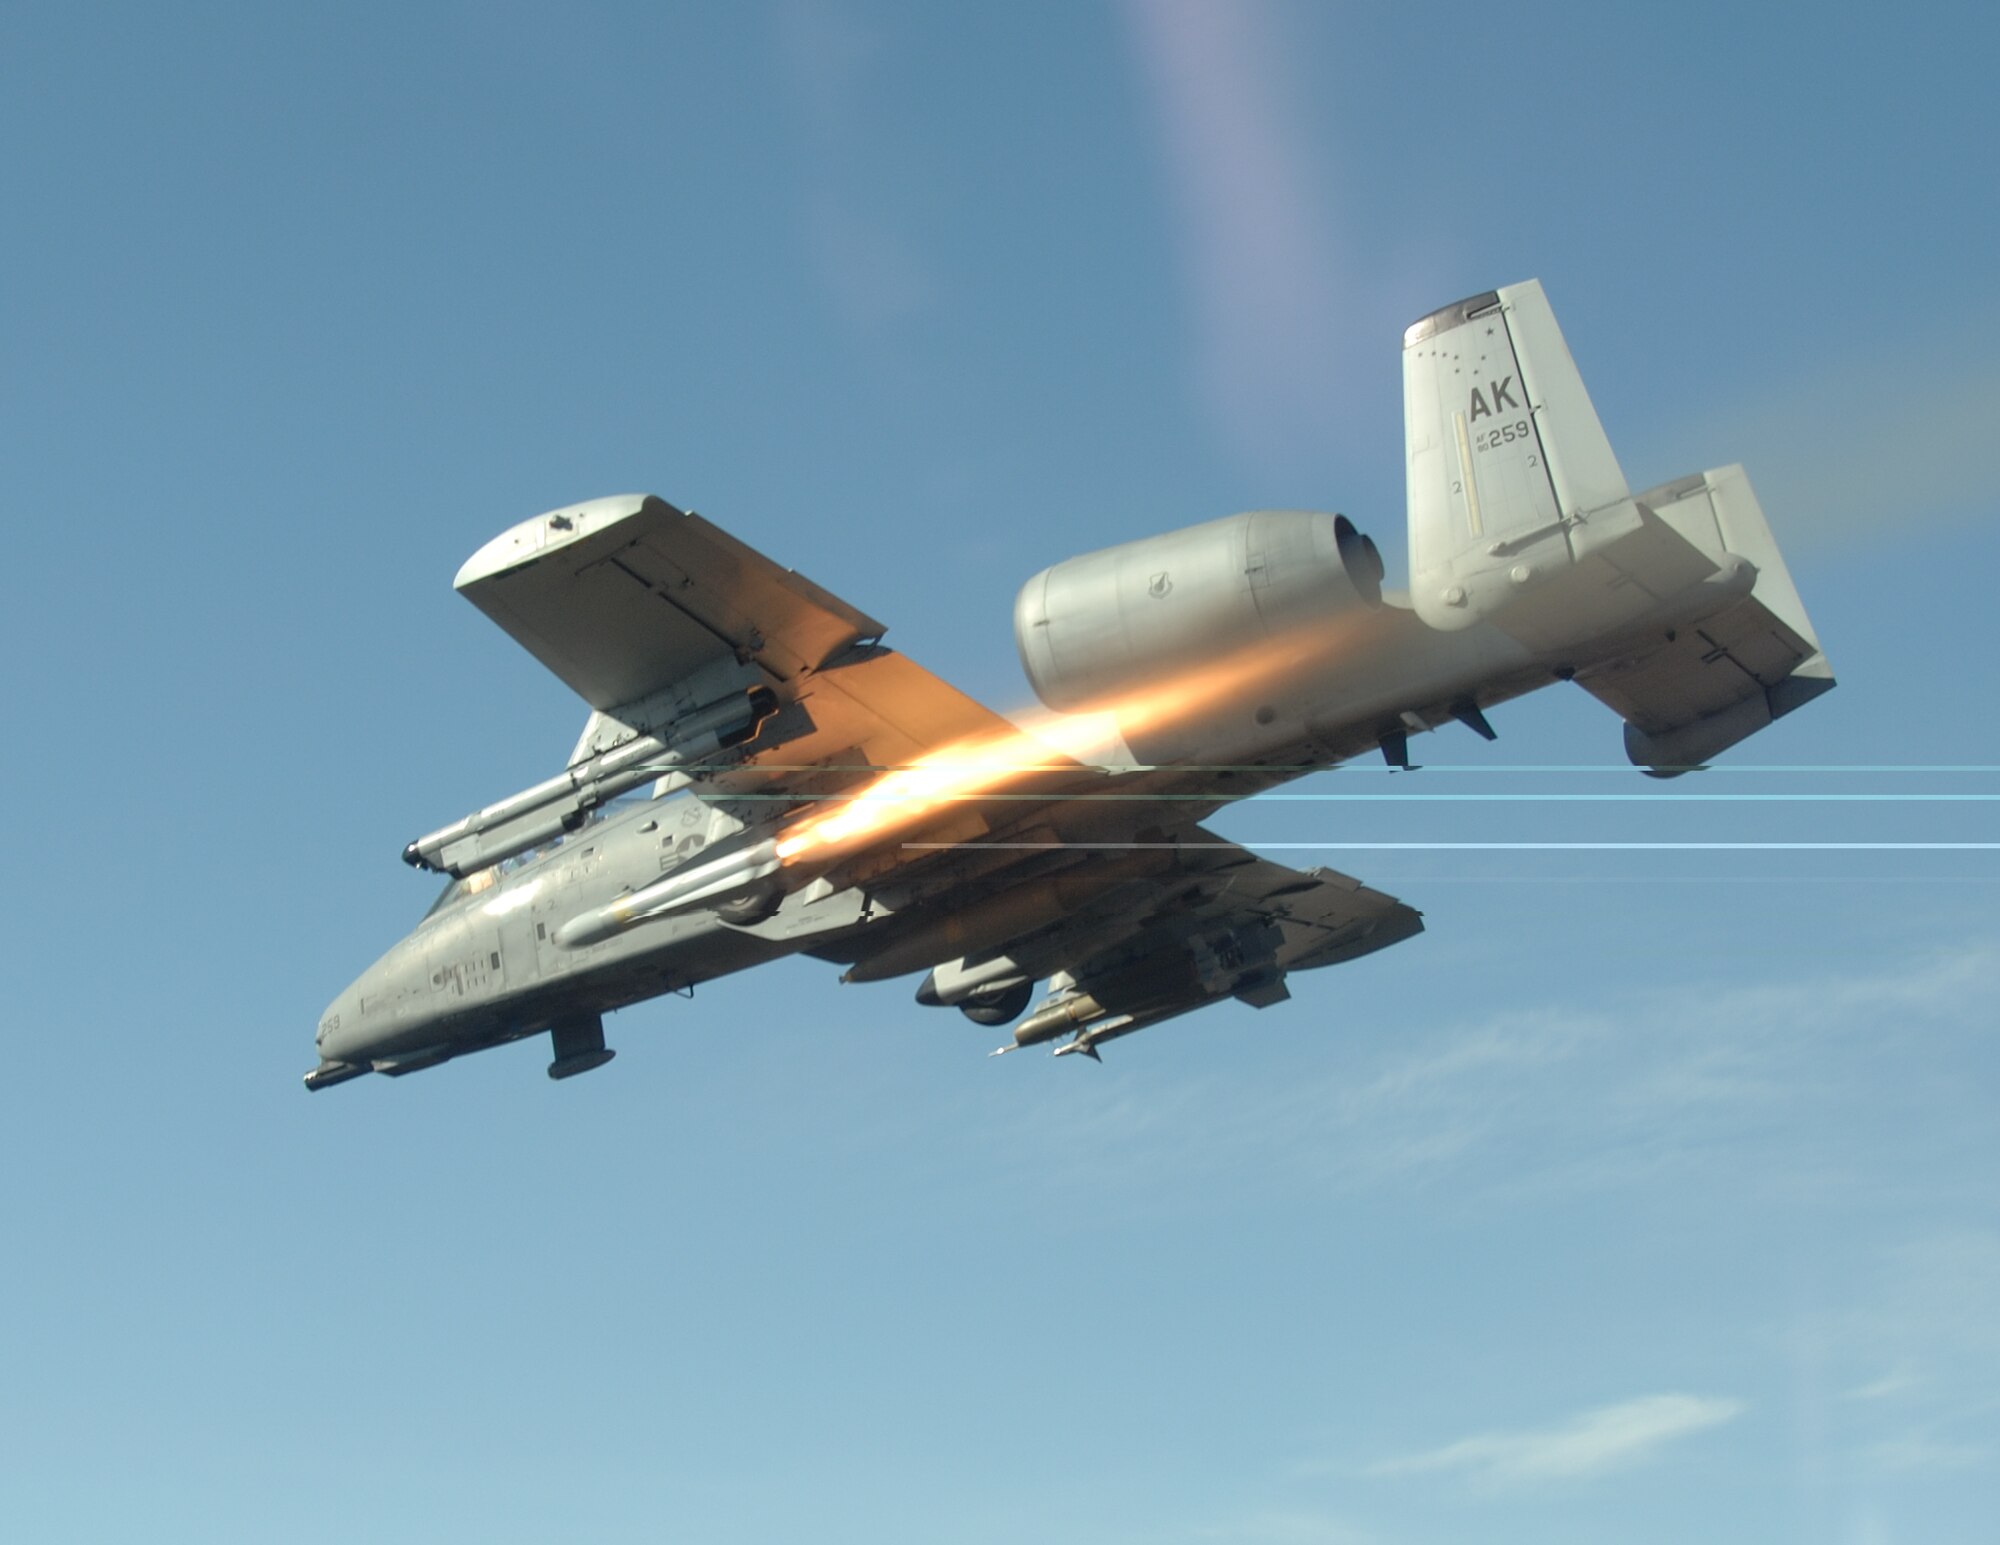 EIELSON AIR FORCE BASE, Alaska--1st Lt Dale Stark, A/OA-10 Warthog pilot from the 355th Fighter Squadron, fires his AGM-65 Maverick missile over the Pacific Alaska Range Complex during live fire training.The 355th Fighter Squadron is tasked to provide mission ready A/OA-10s as well as search and rescue capability, in Alaska and deployed sites worldwide. (U.S. Air Force photo by Master Sgt. Robert Wieland) (Cleared)